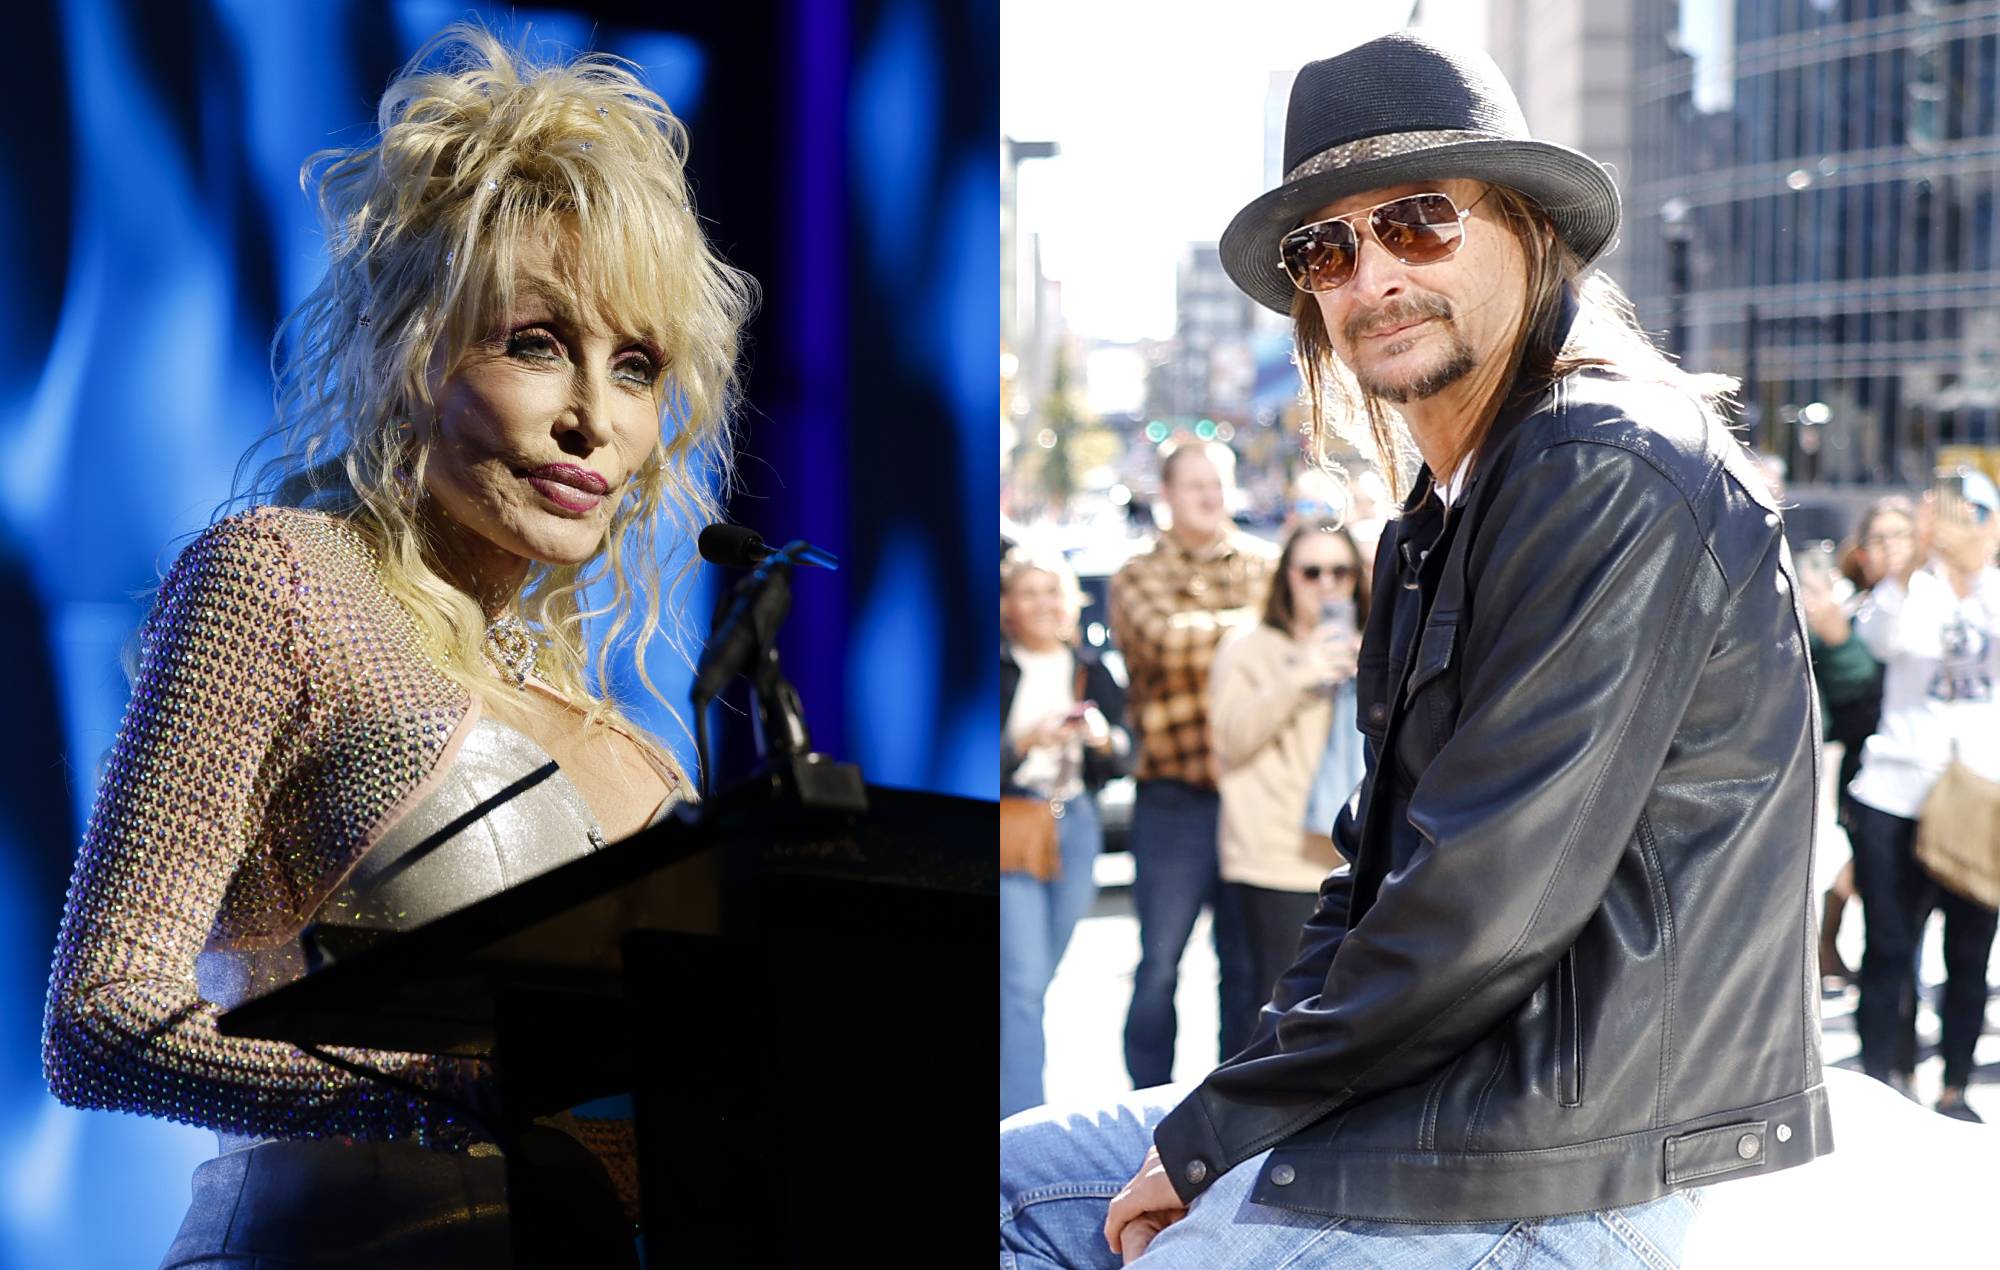 Dolly Parton defends Kid Rock collaboration, says cancel culture is “terrible”